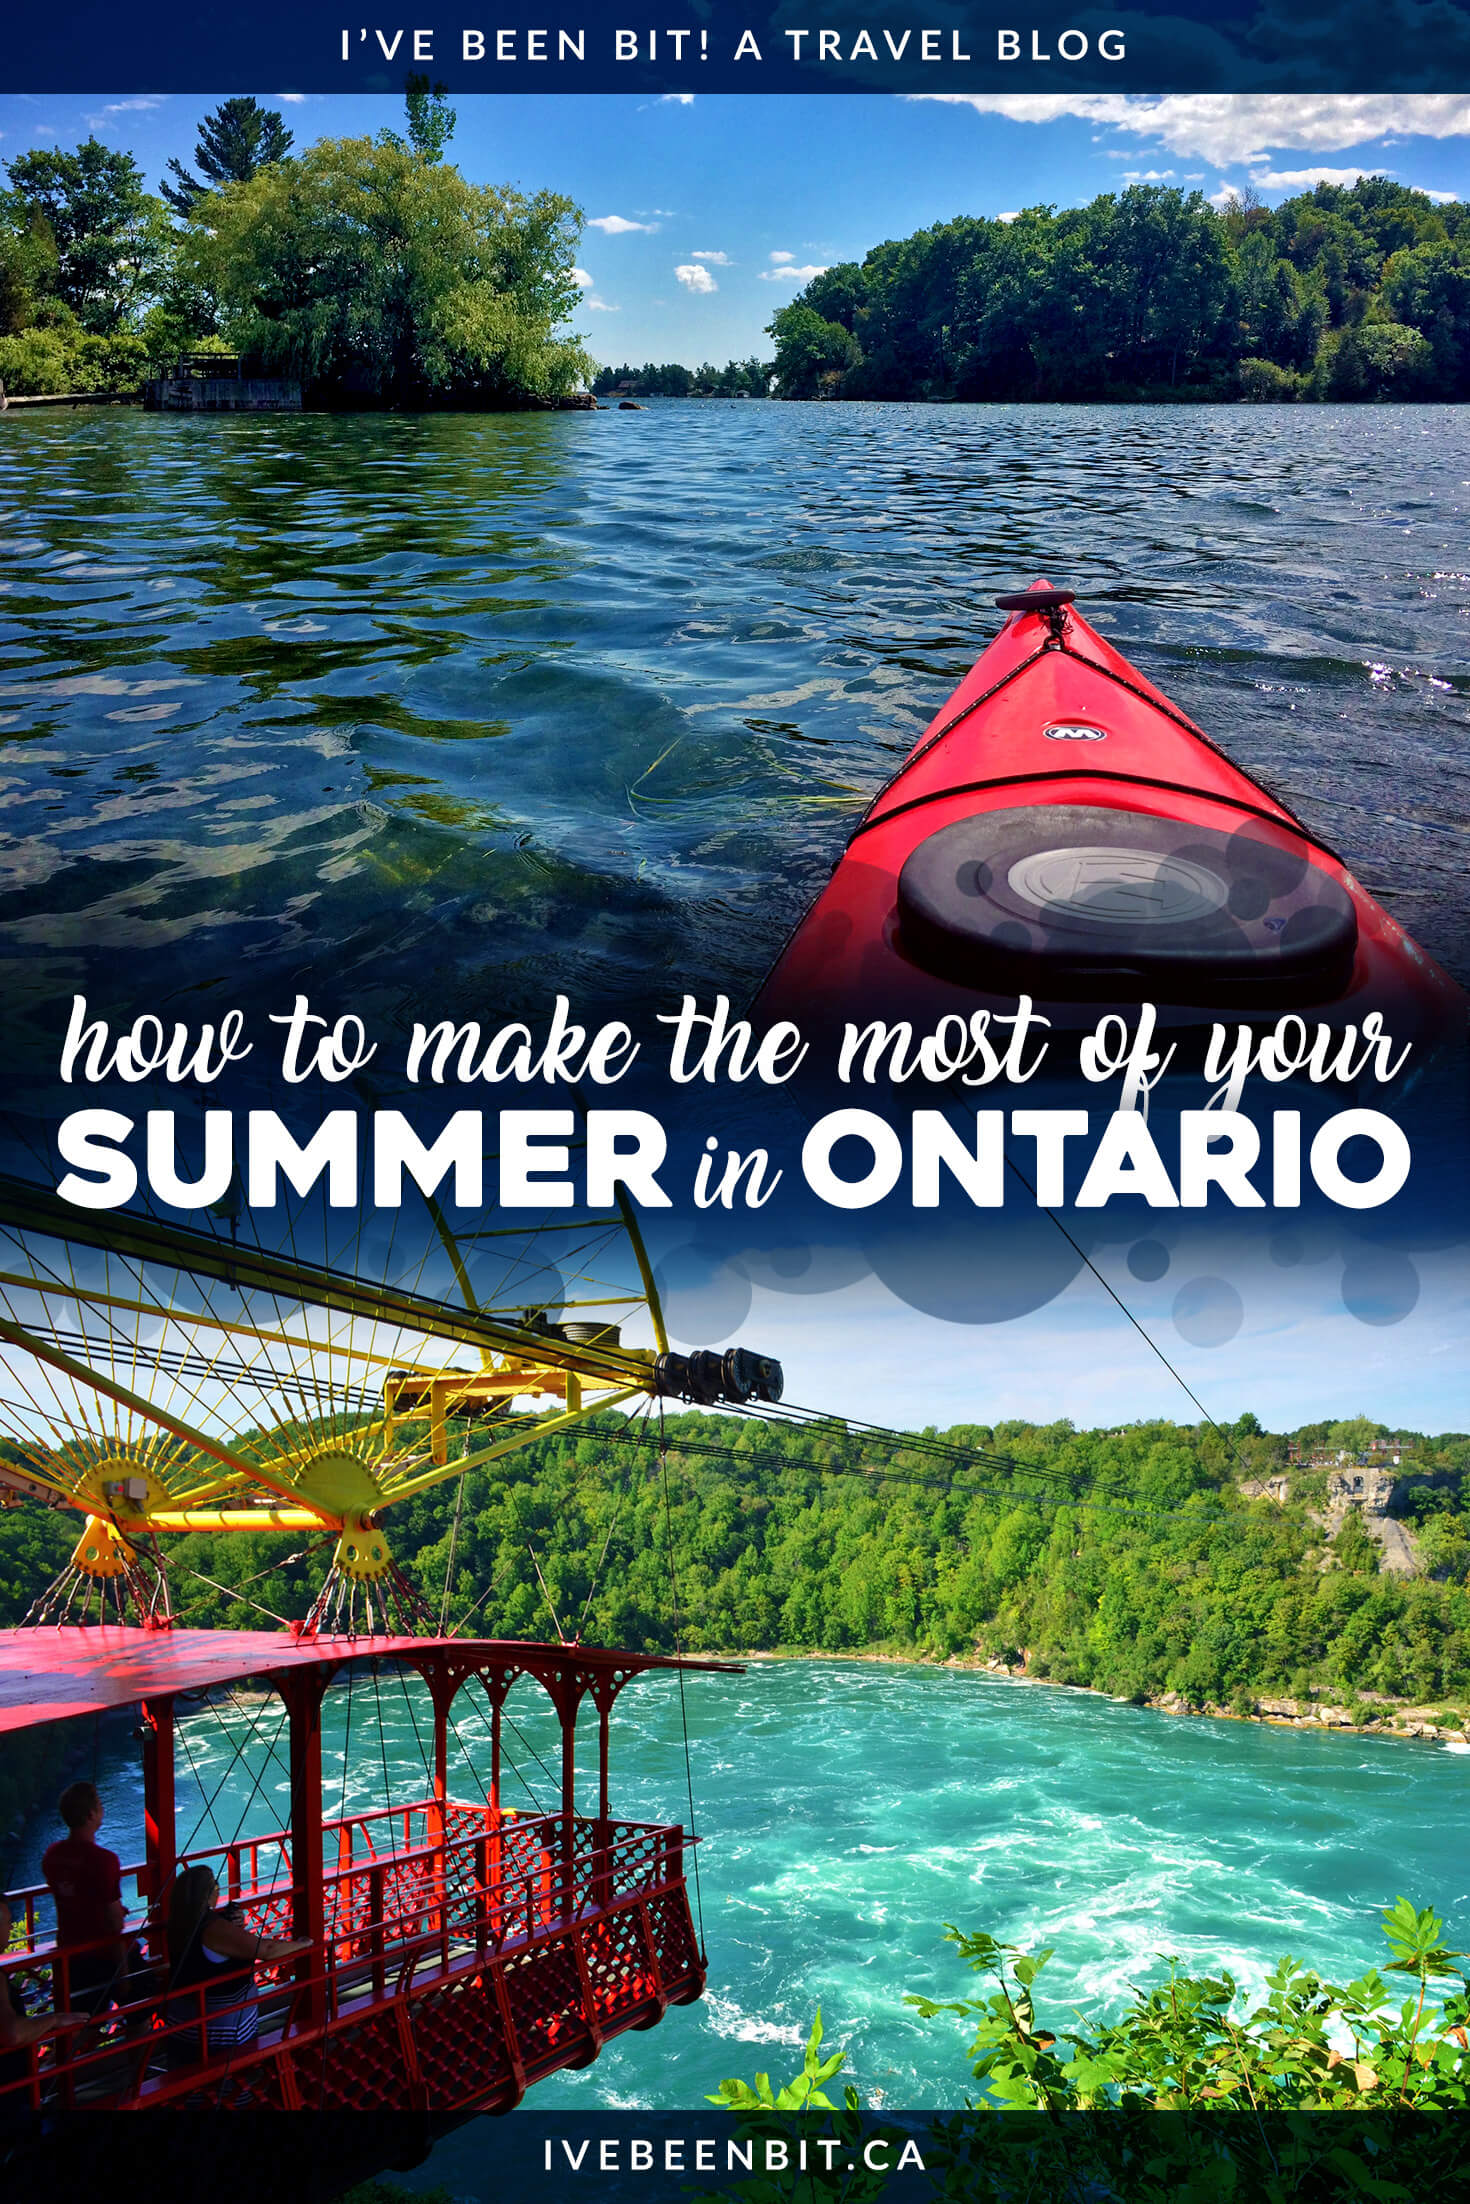 summer day trips ontario